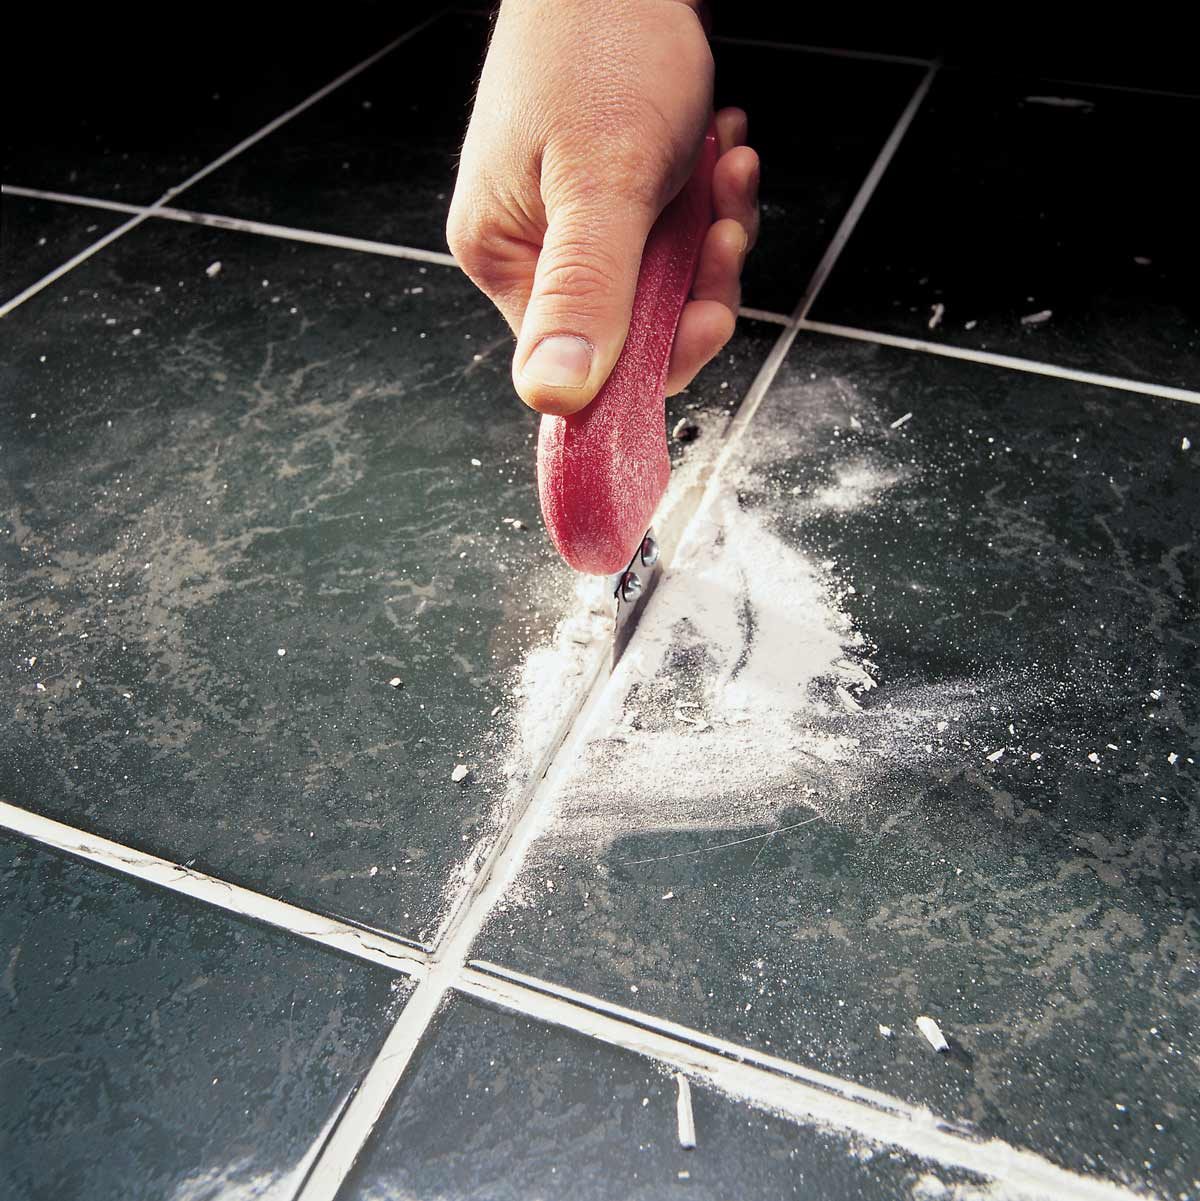 How to Repair Grout That's Cracking